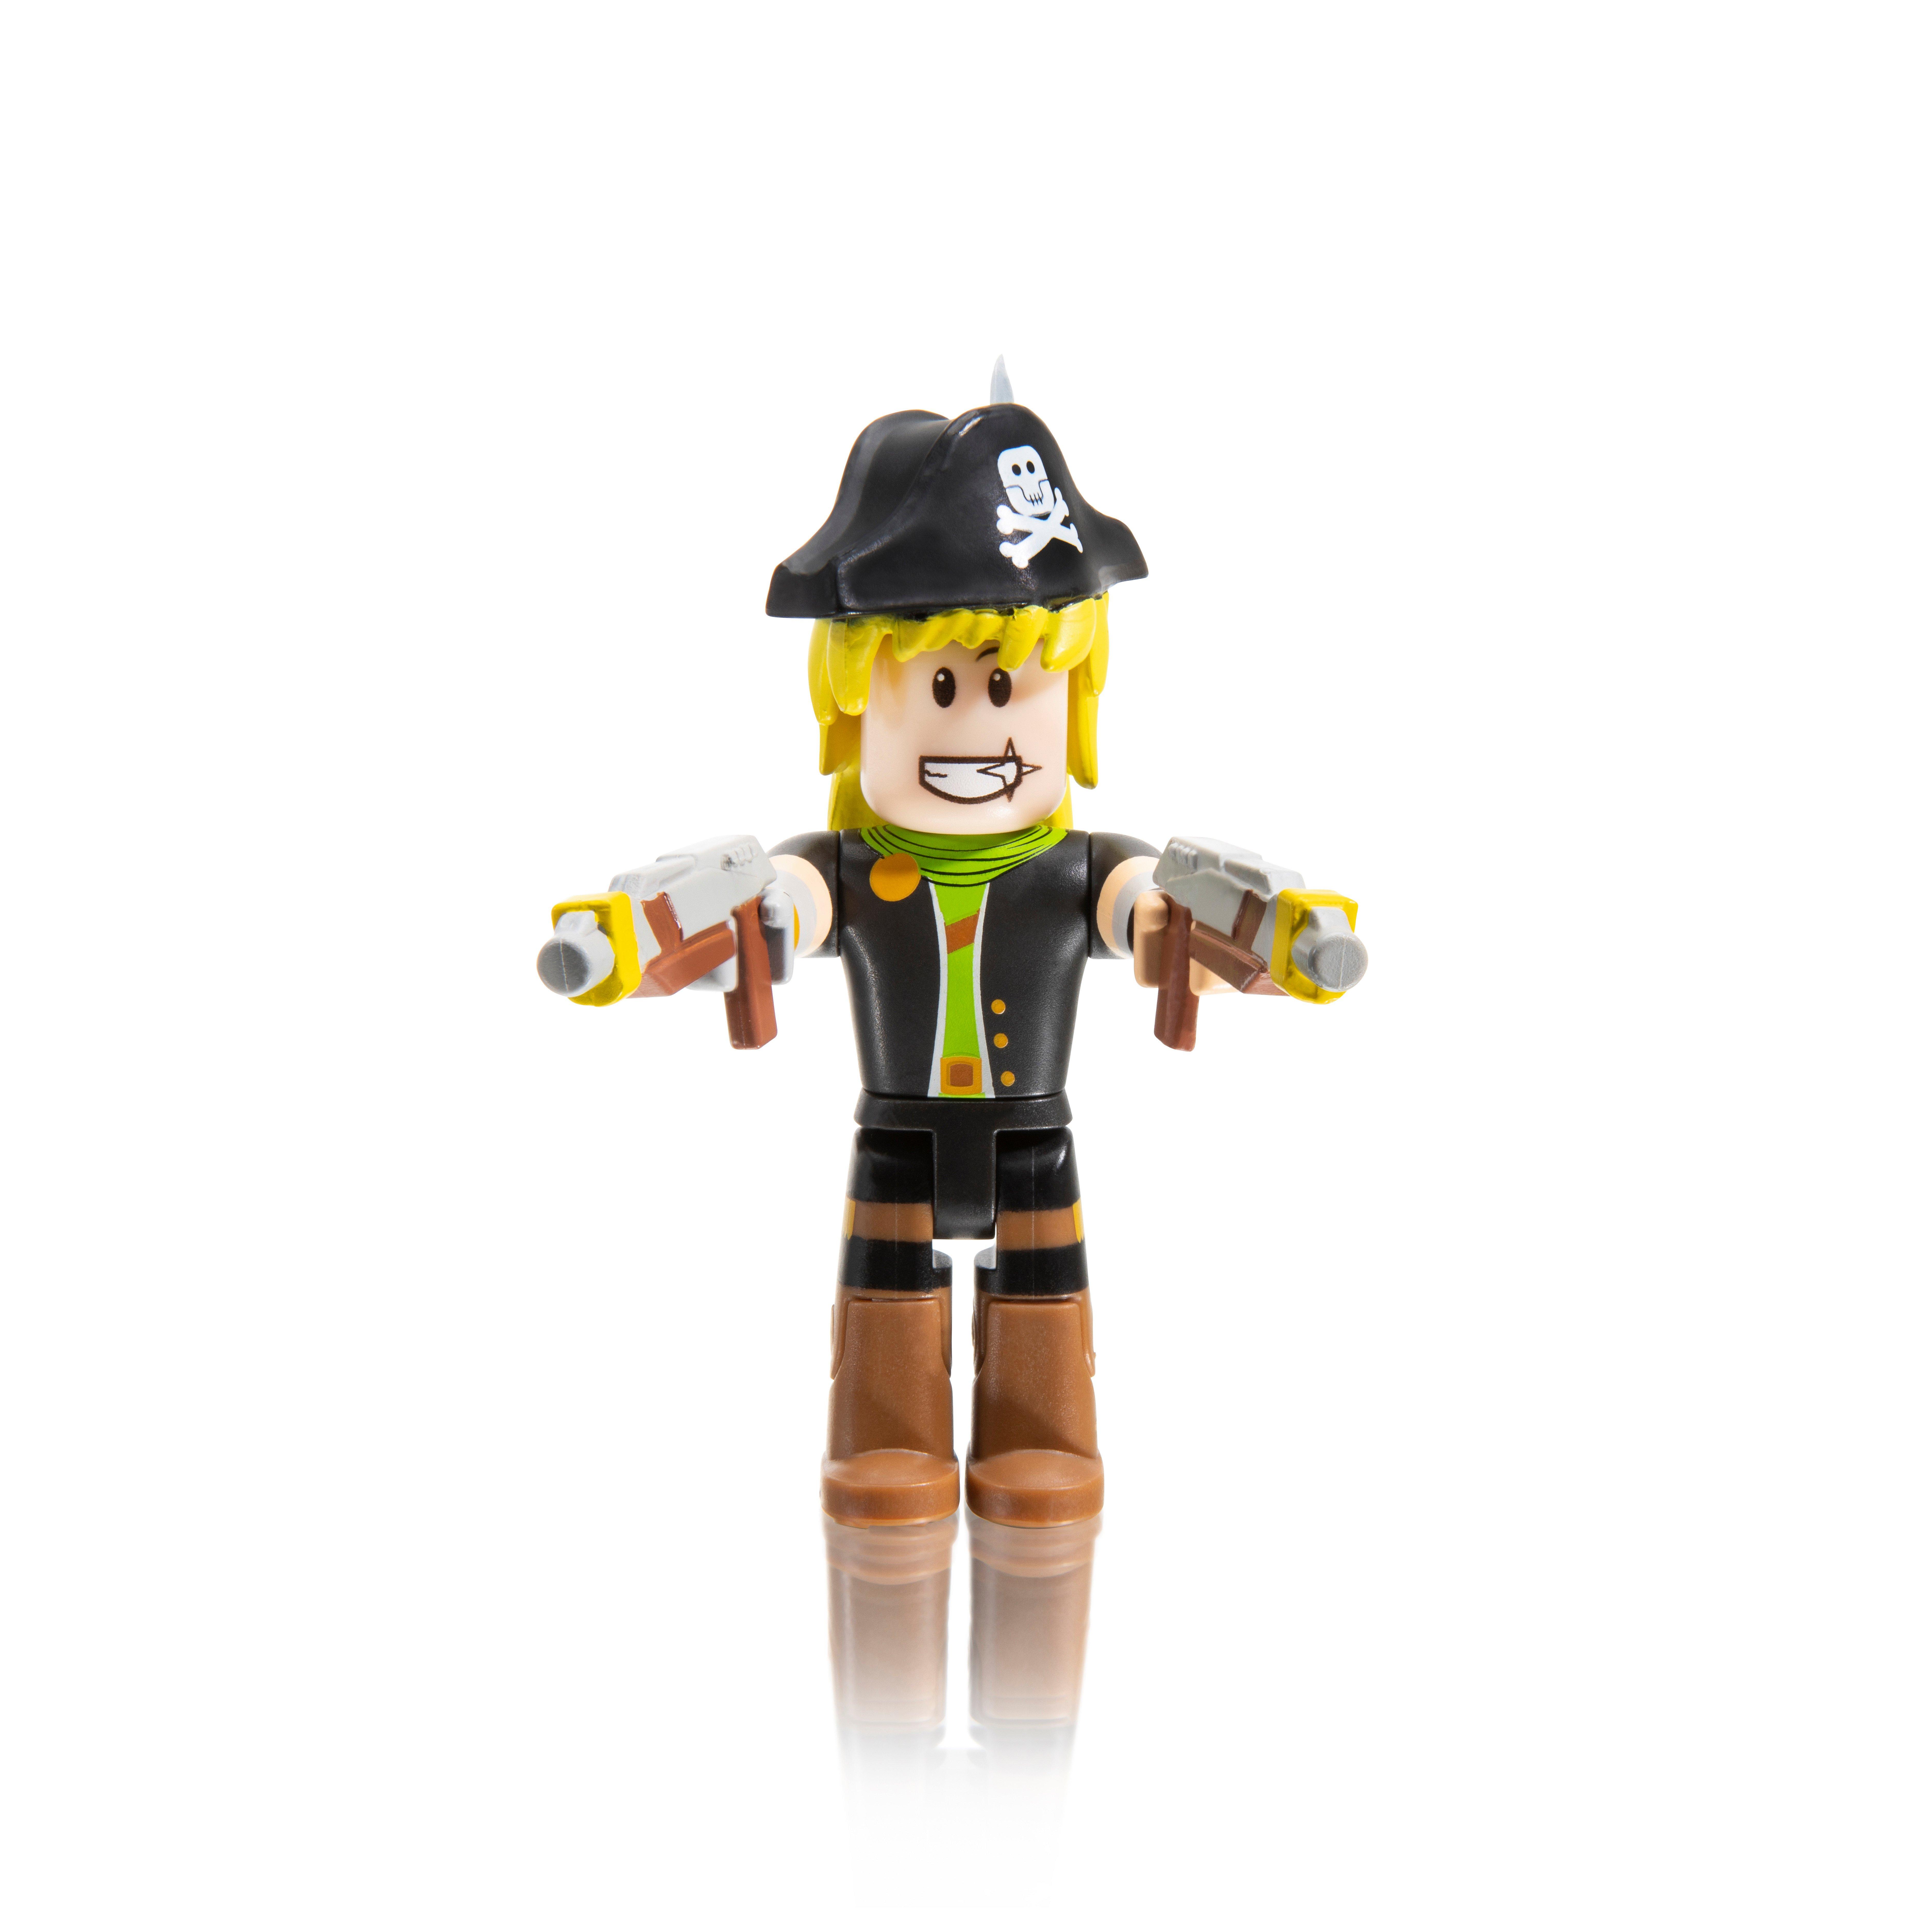 roblox action figure package